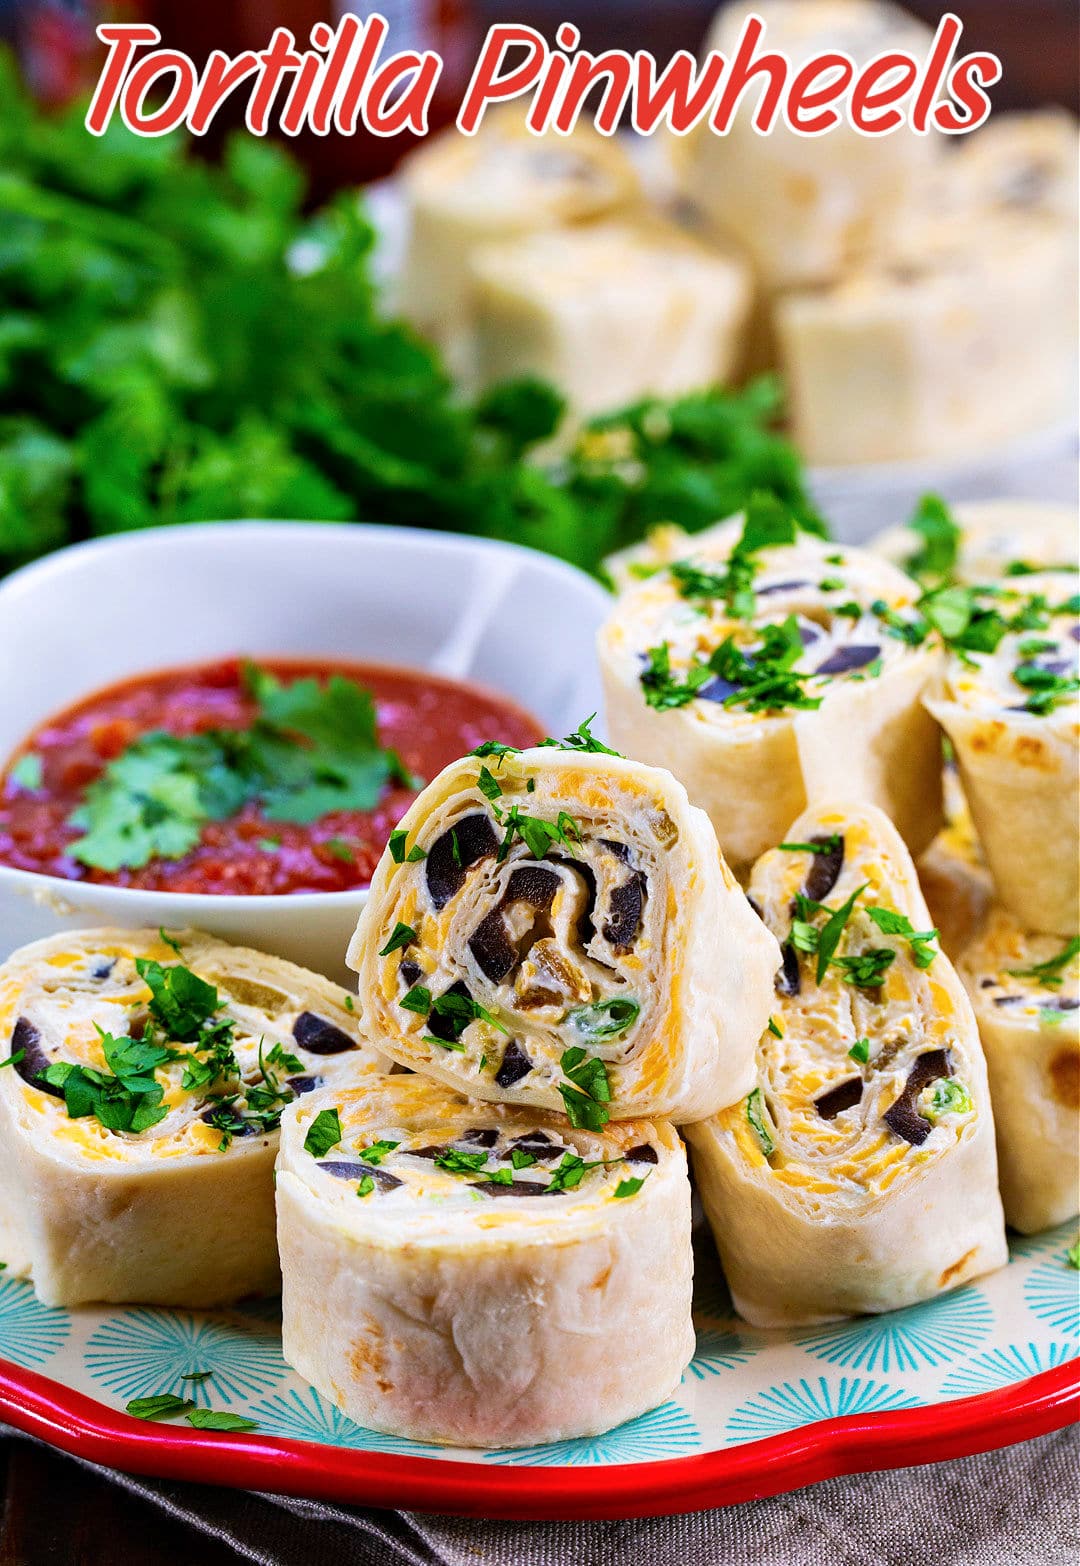 Tortilla Pinwheels on plate with a bowl of salsa.